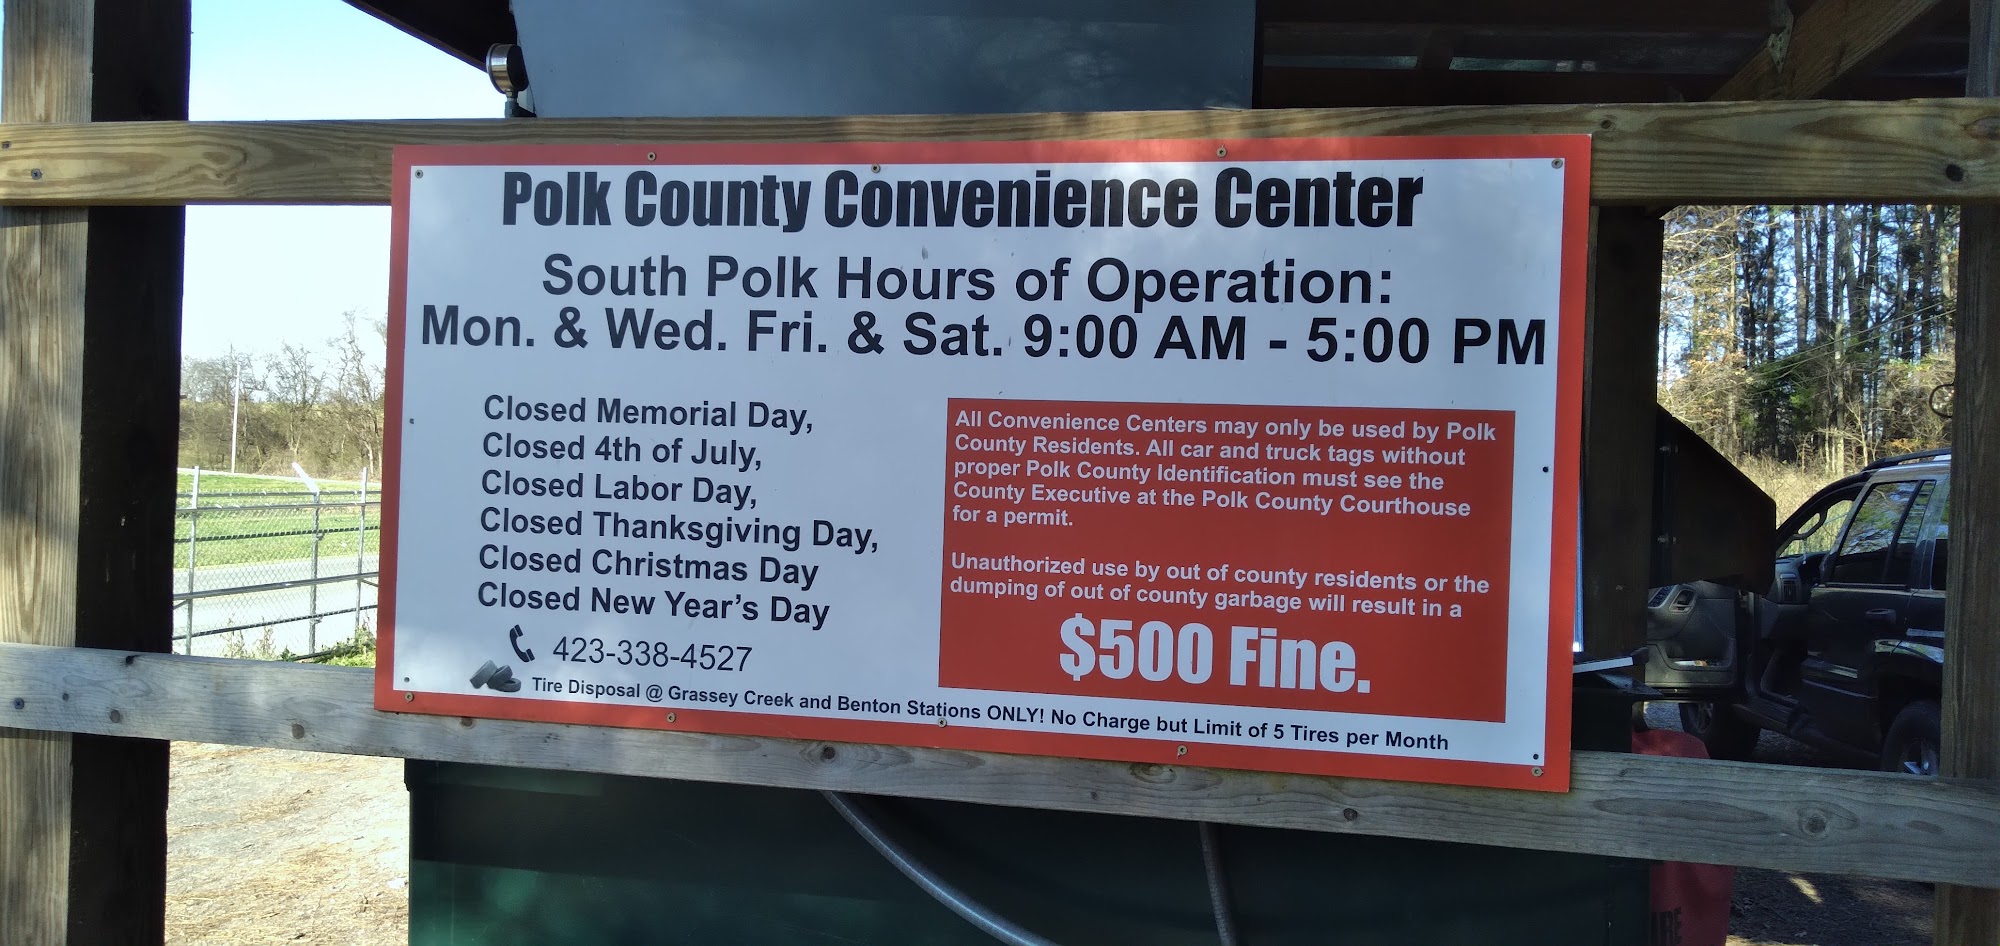 Polk County Sanitation South Polk Convenience Center 1030 Old Federal Rd, Old Fort Tennessee 37362